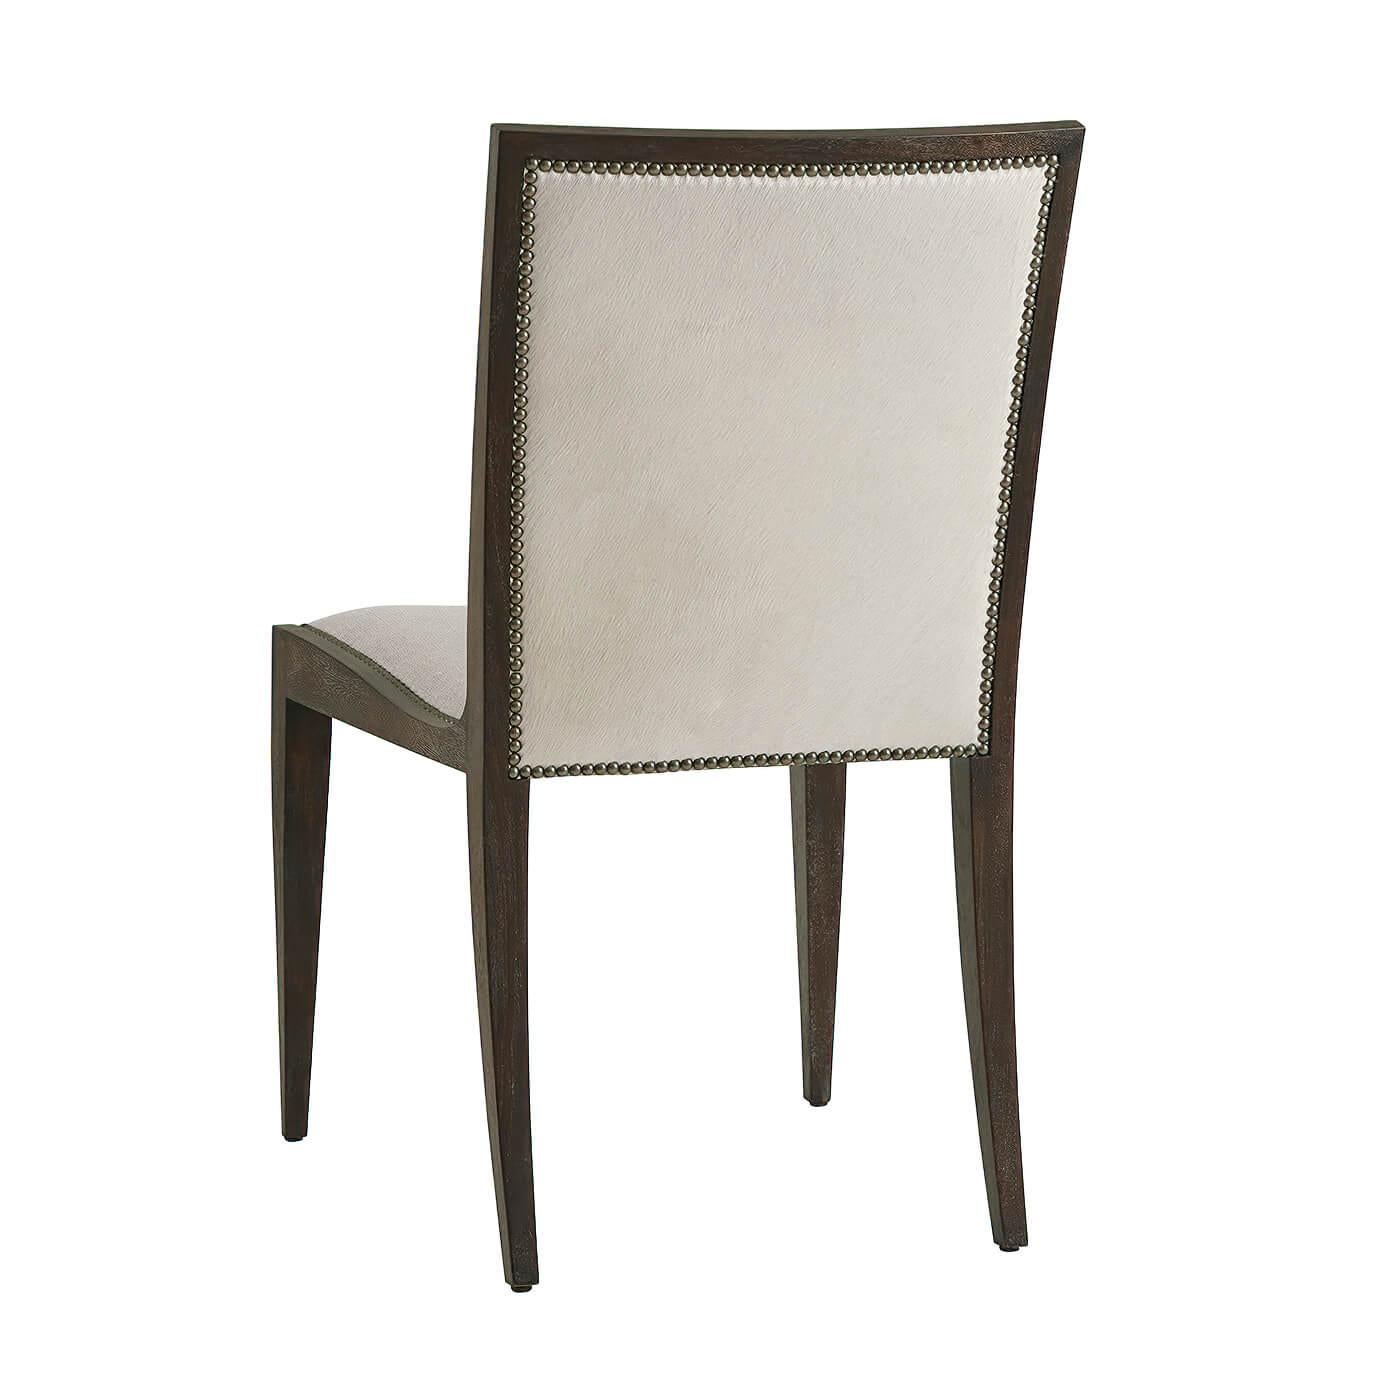 Vietnamese Mid-Century Modern Dining Chair For Sale